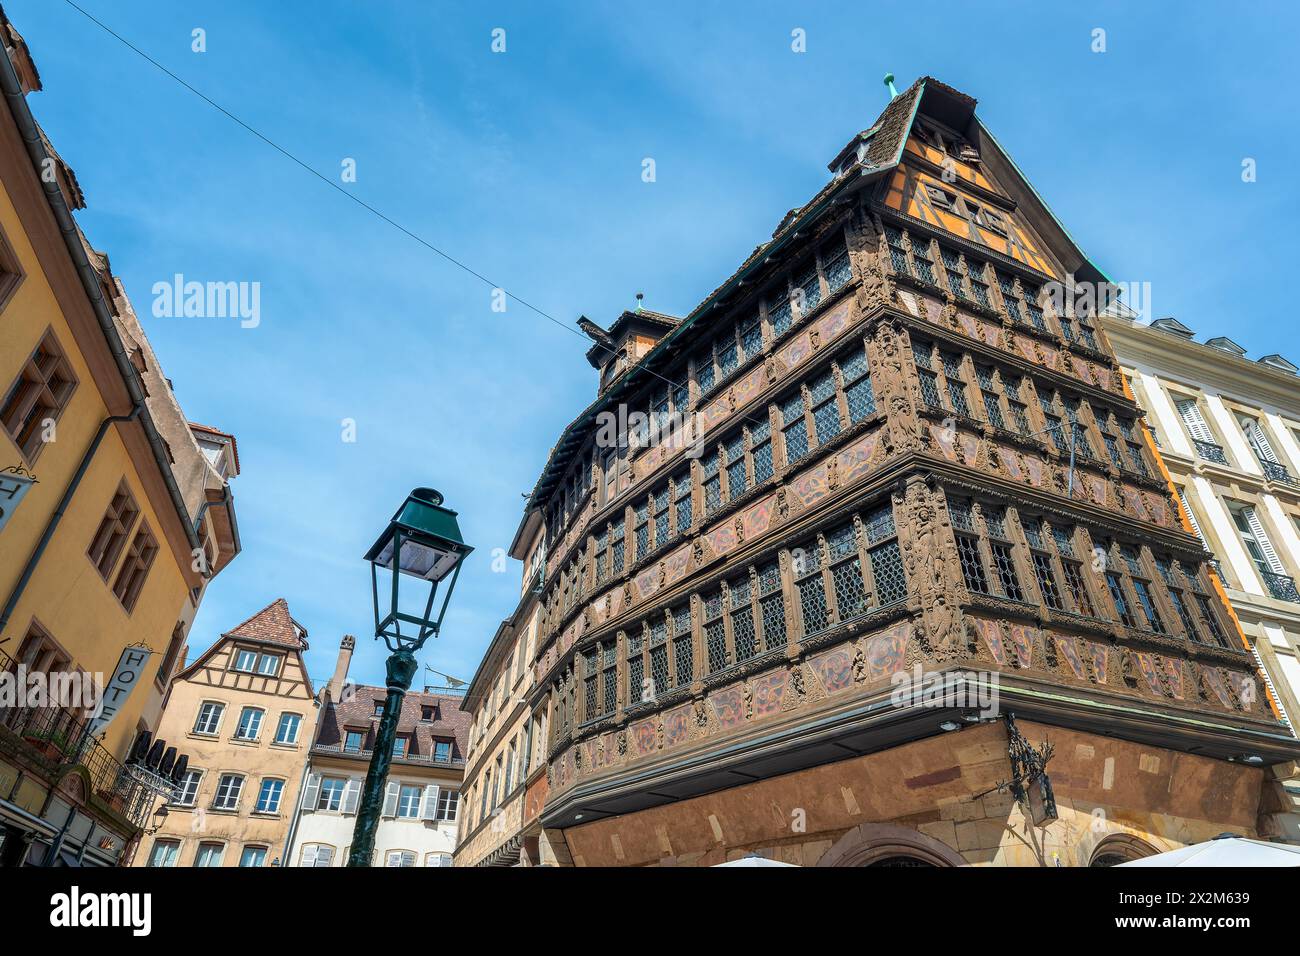 Maison Kammerzel, old medieval house with wooden carved walls in Strasbourg, France Stock Photo